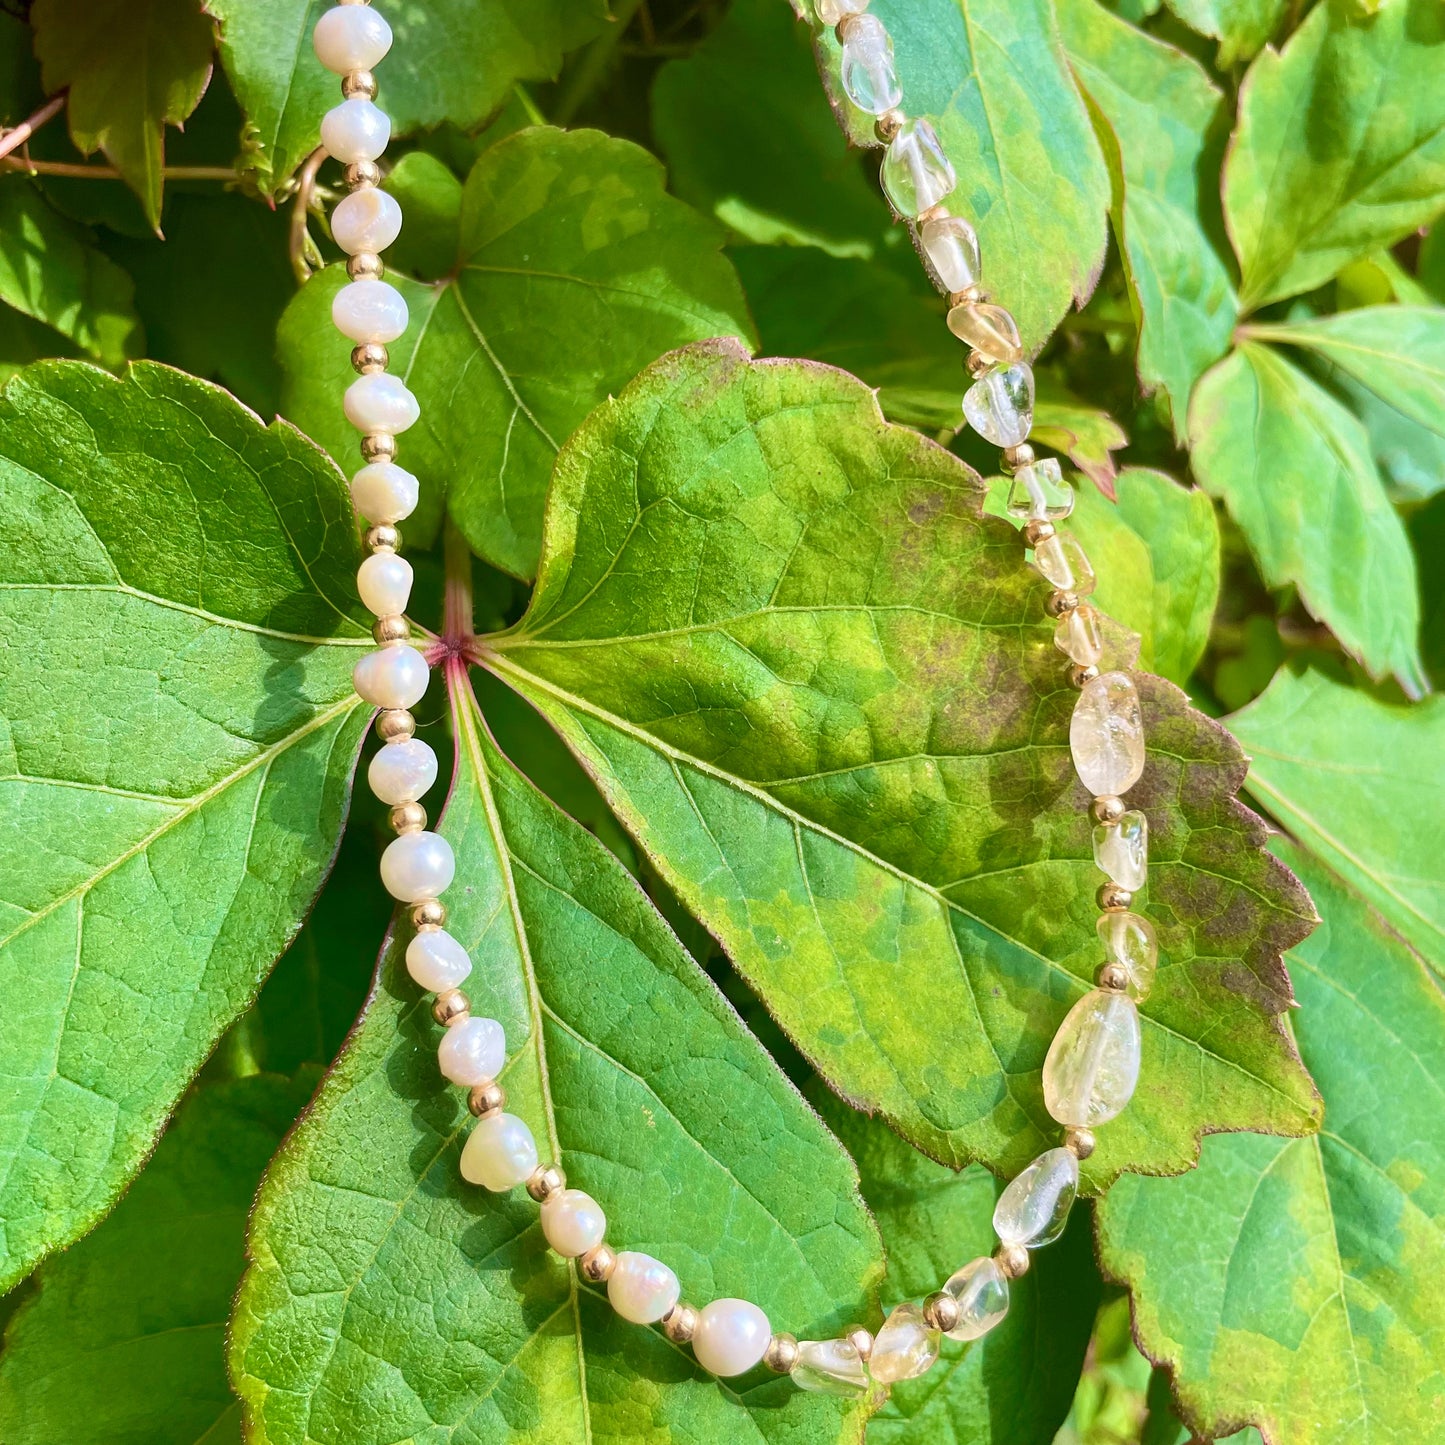 Rose Quartz and Pearl Choker Necklace